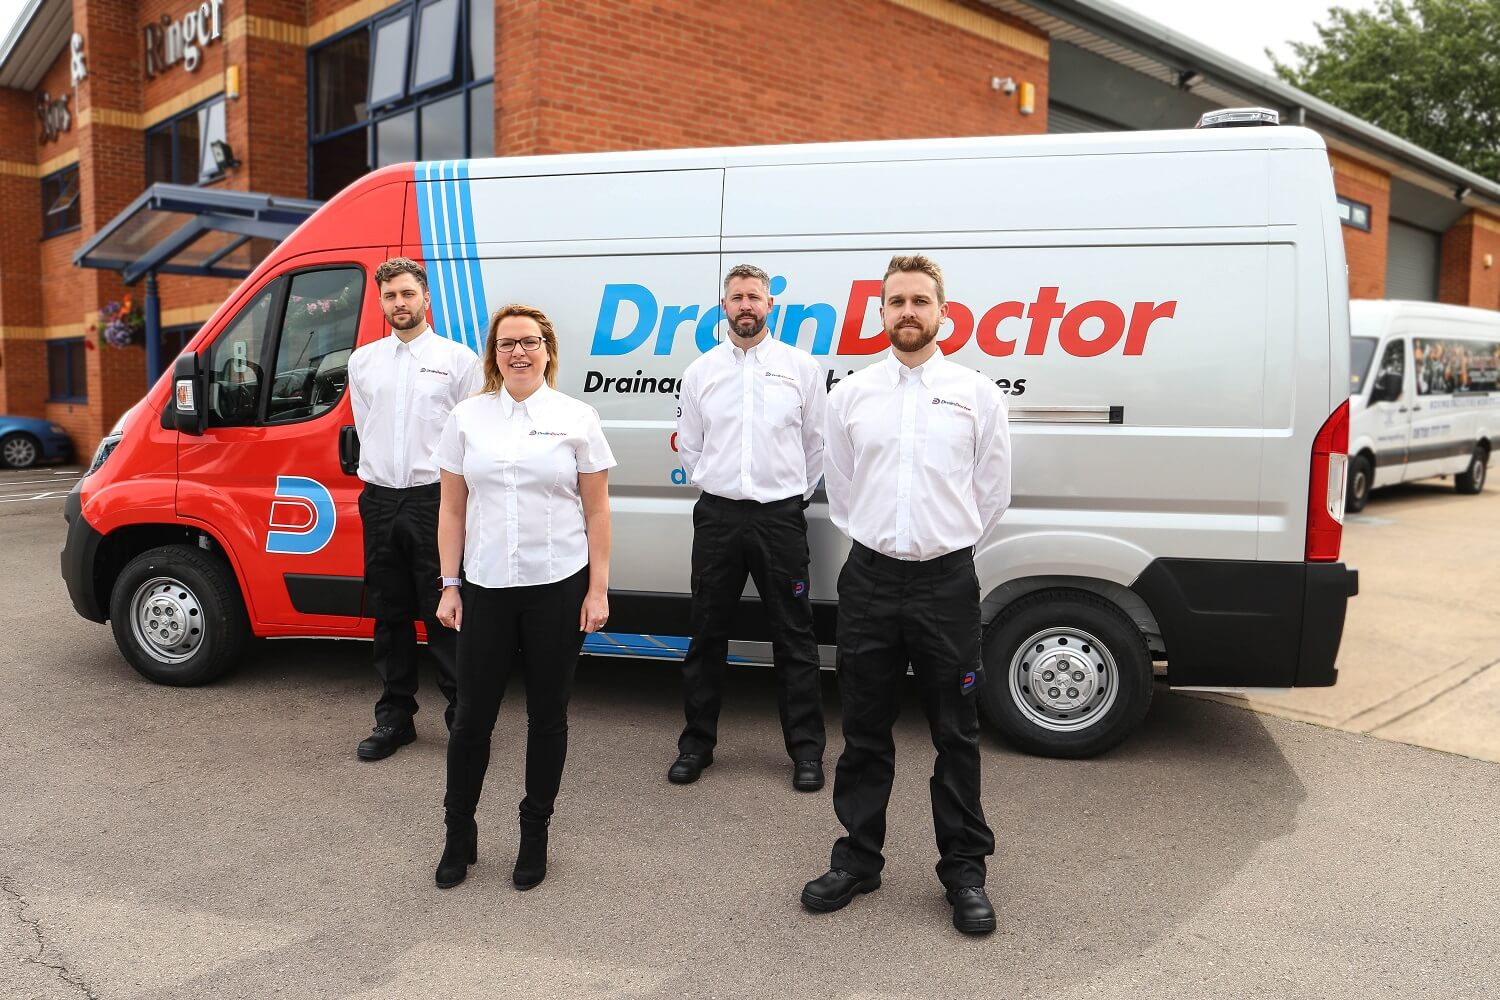 drain doctor franchisee with van